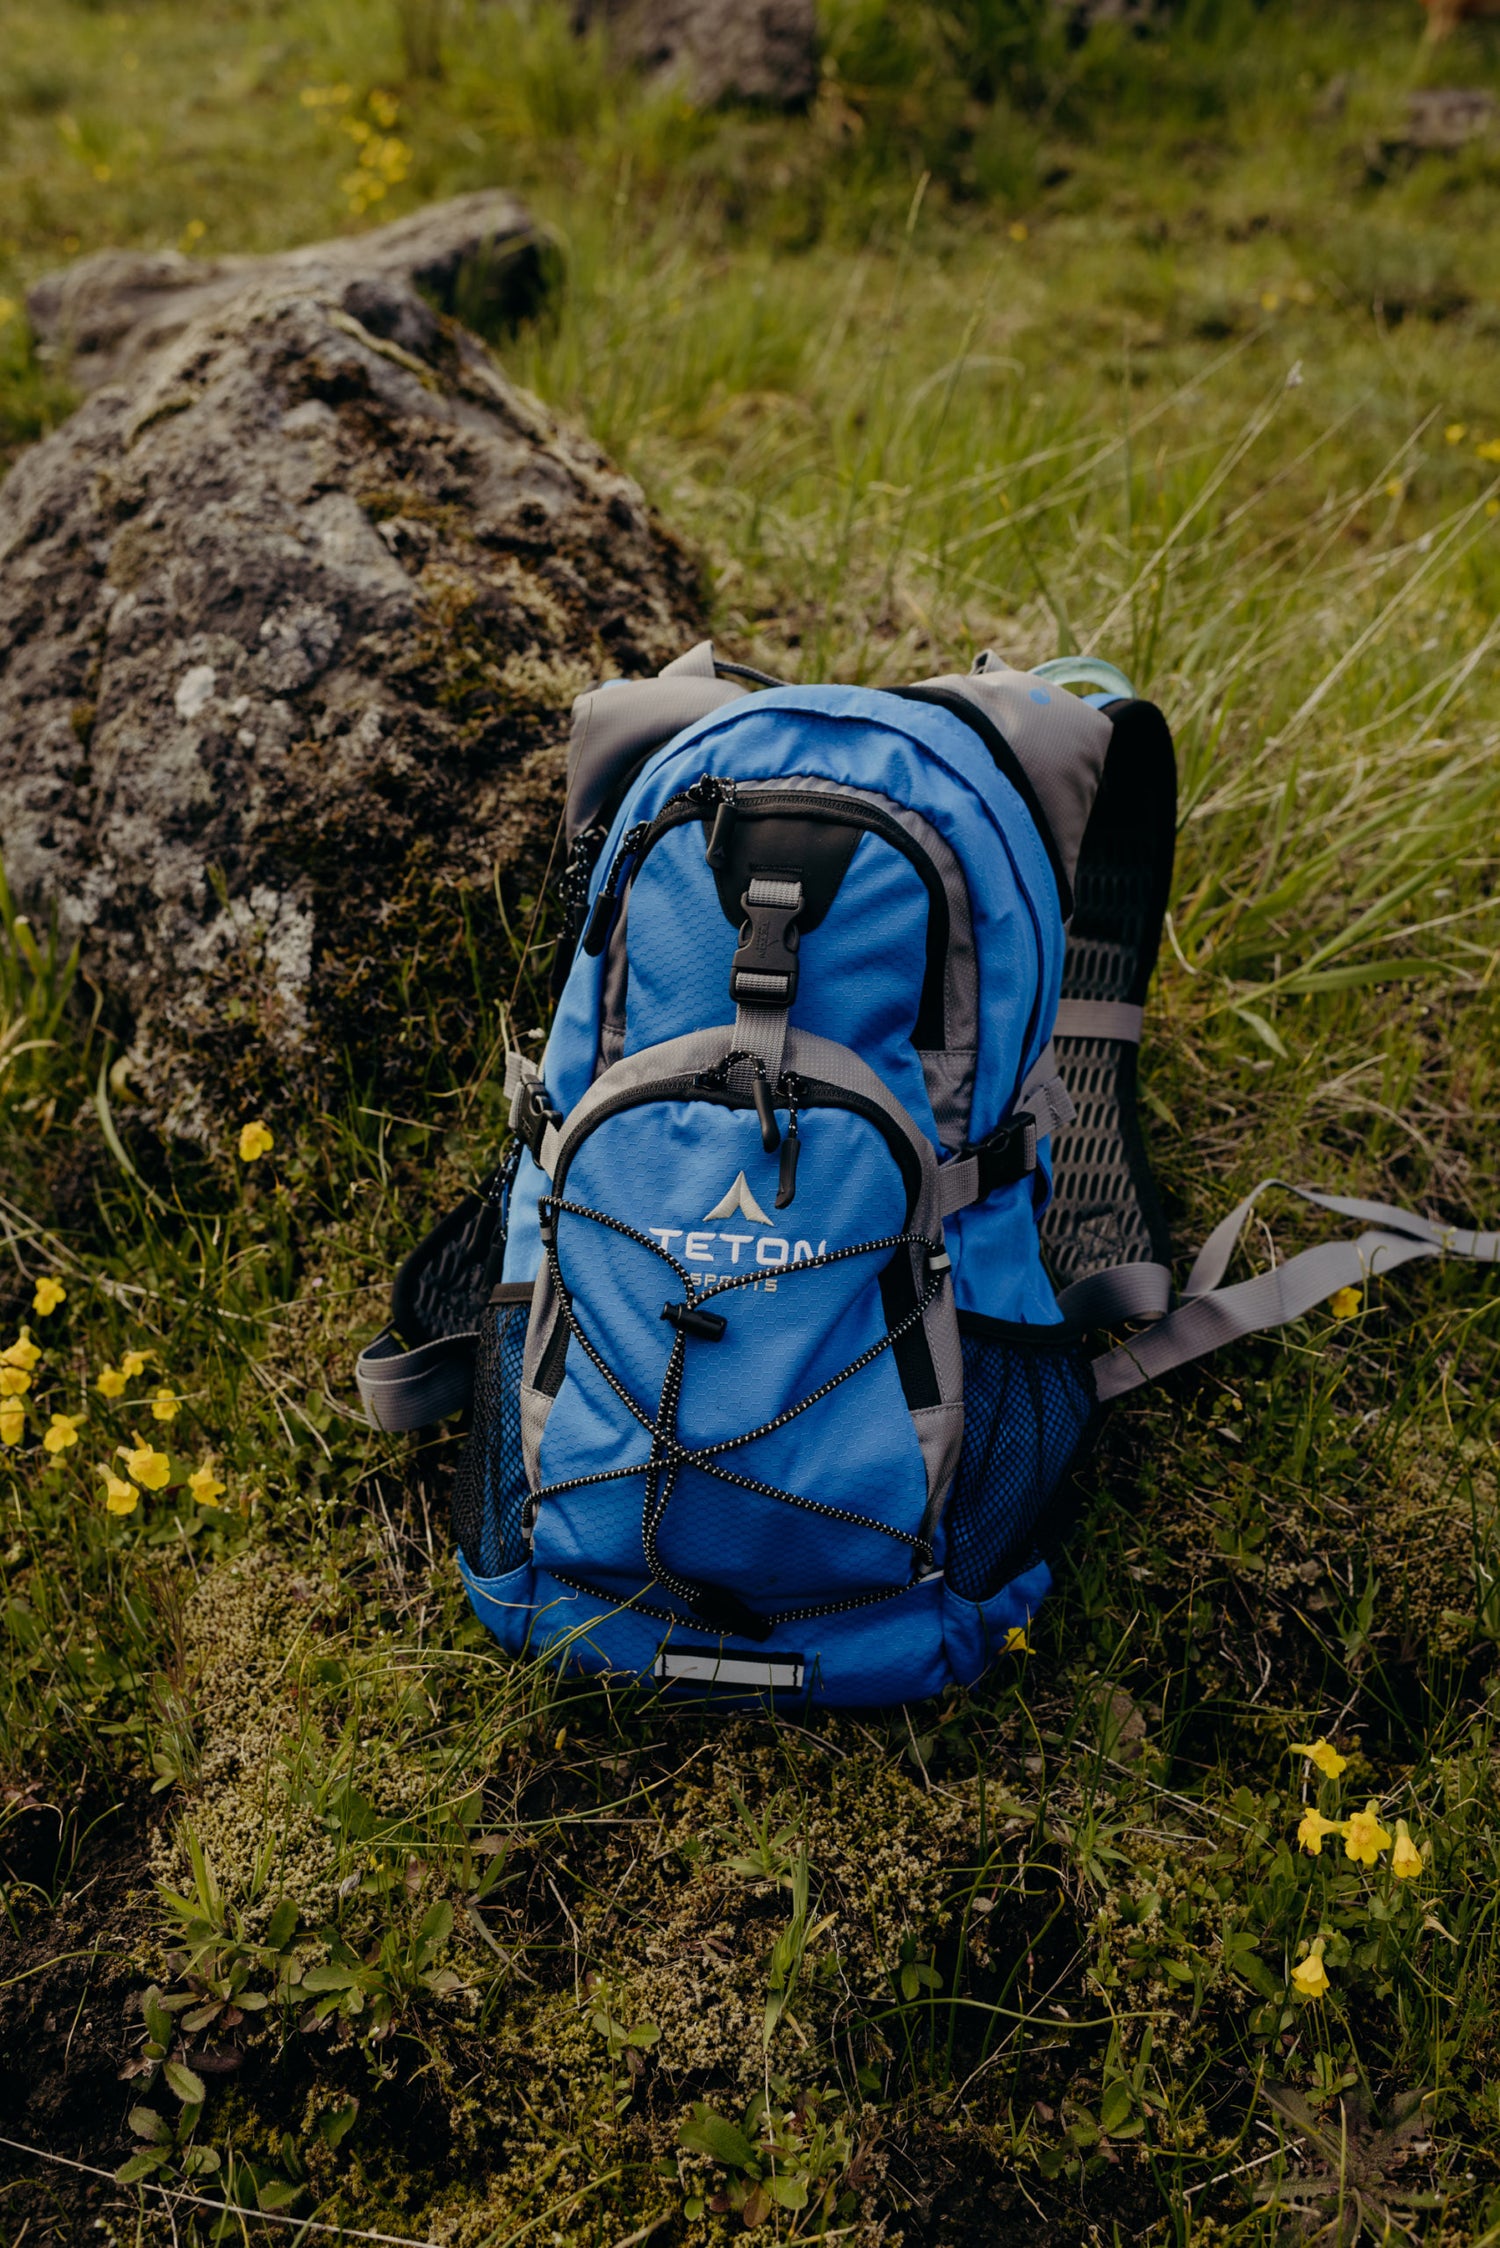 The Oasis 1100 Hydration Backpack